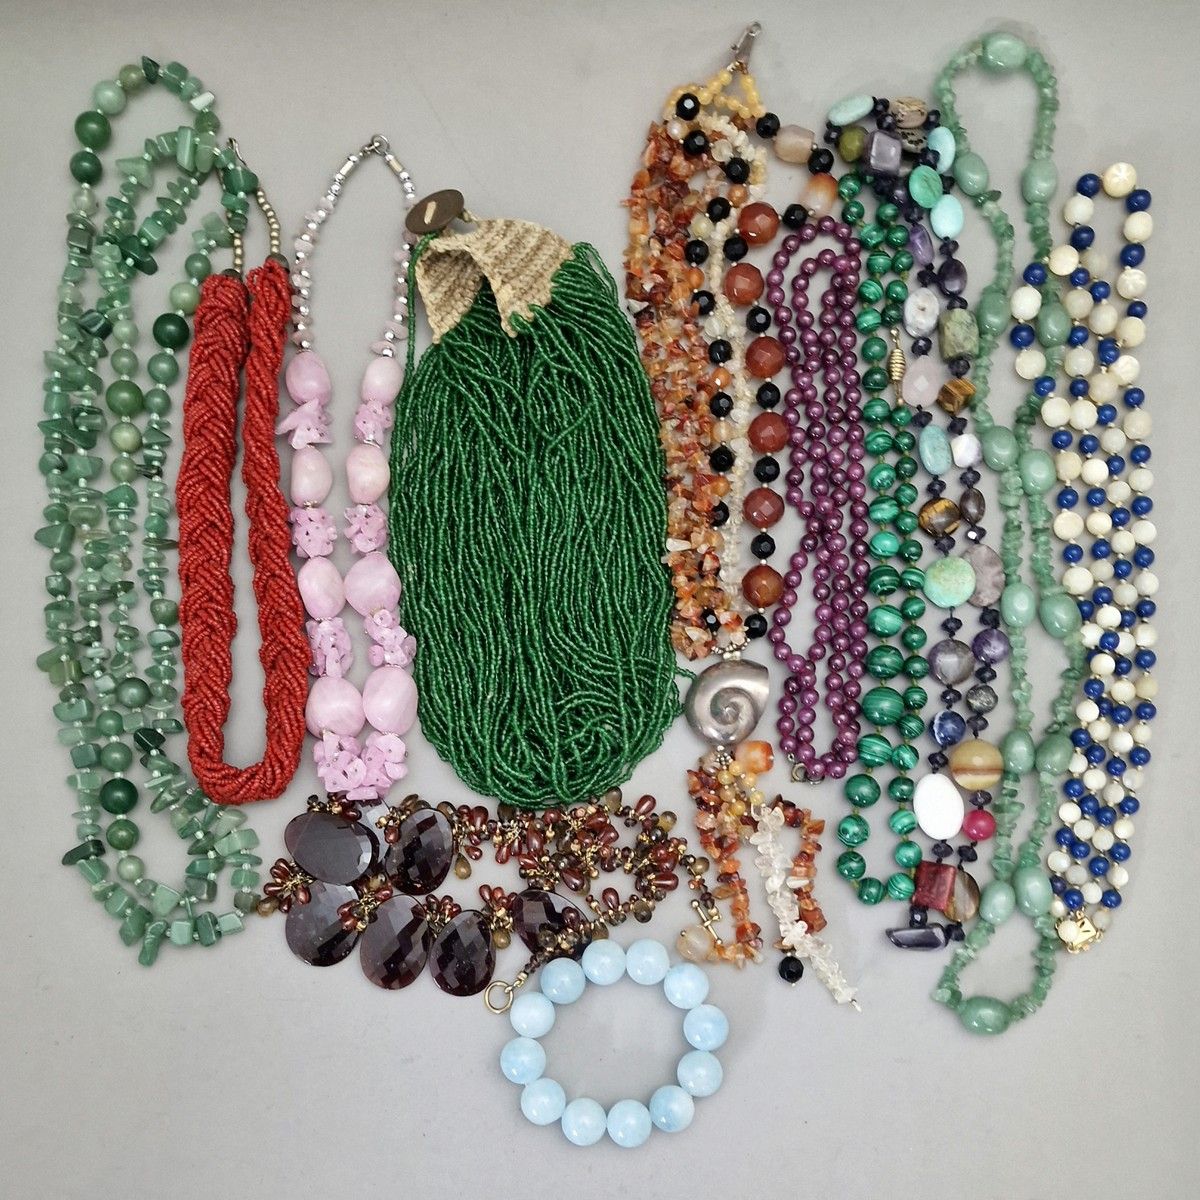 Null 12 NECKLACES in glass beads and semi-precious stones